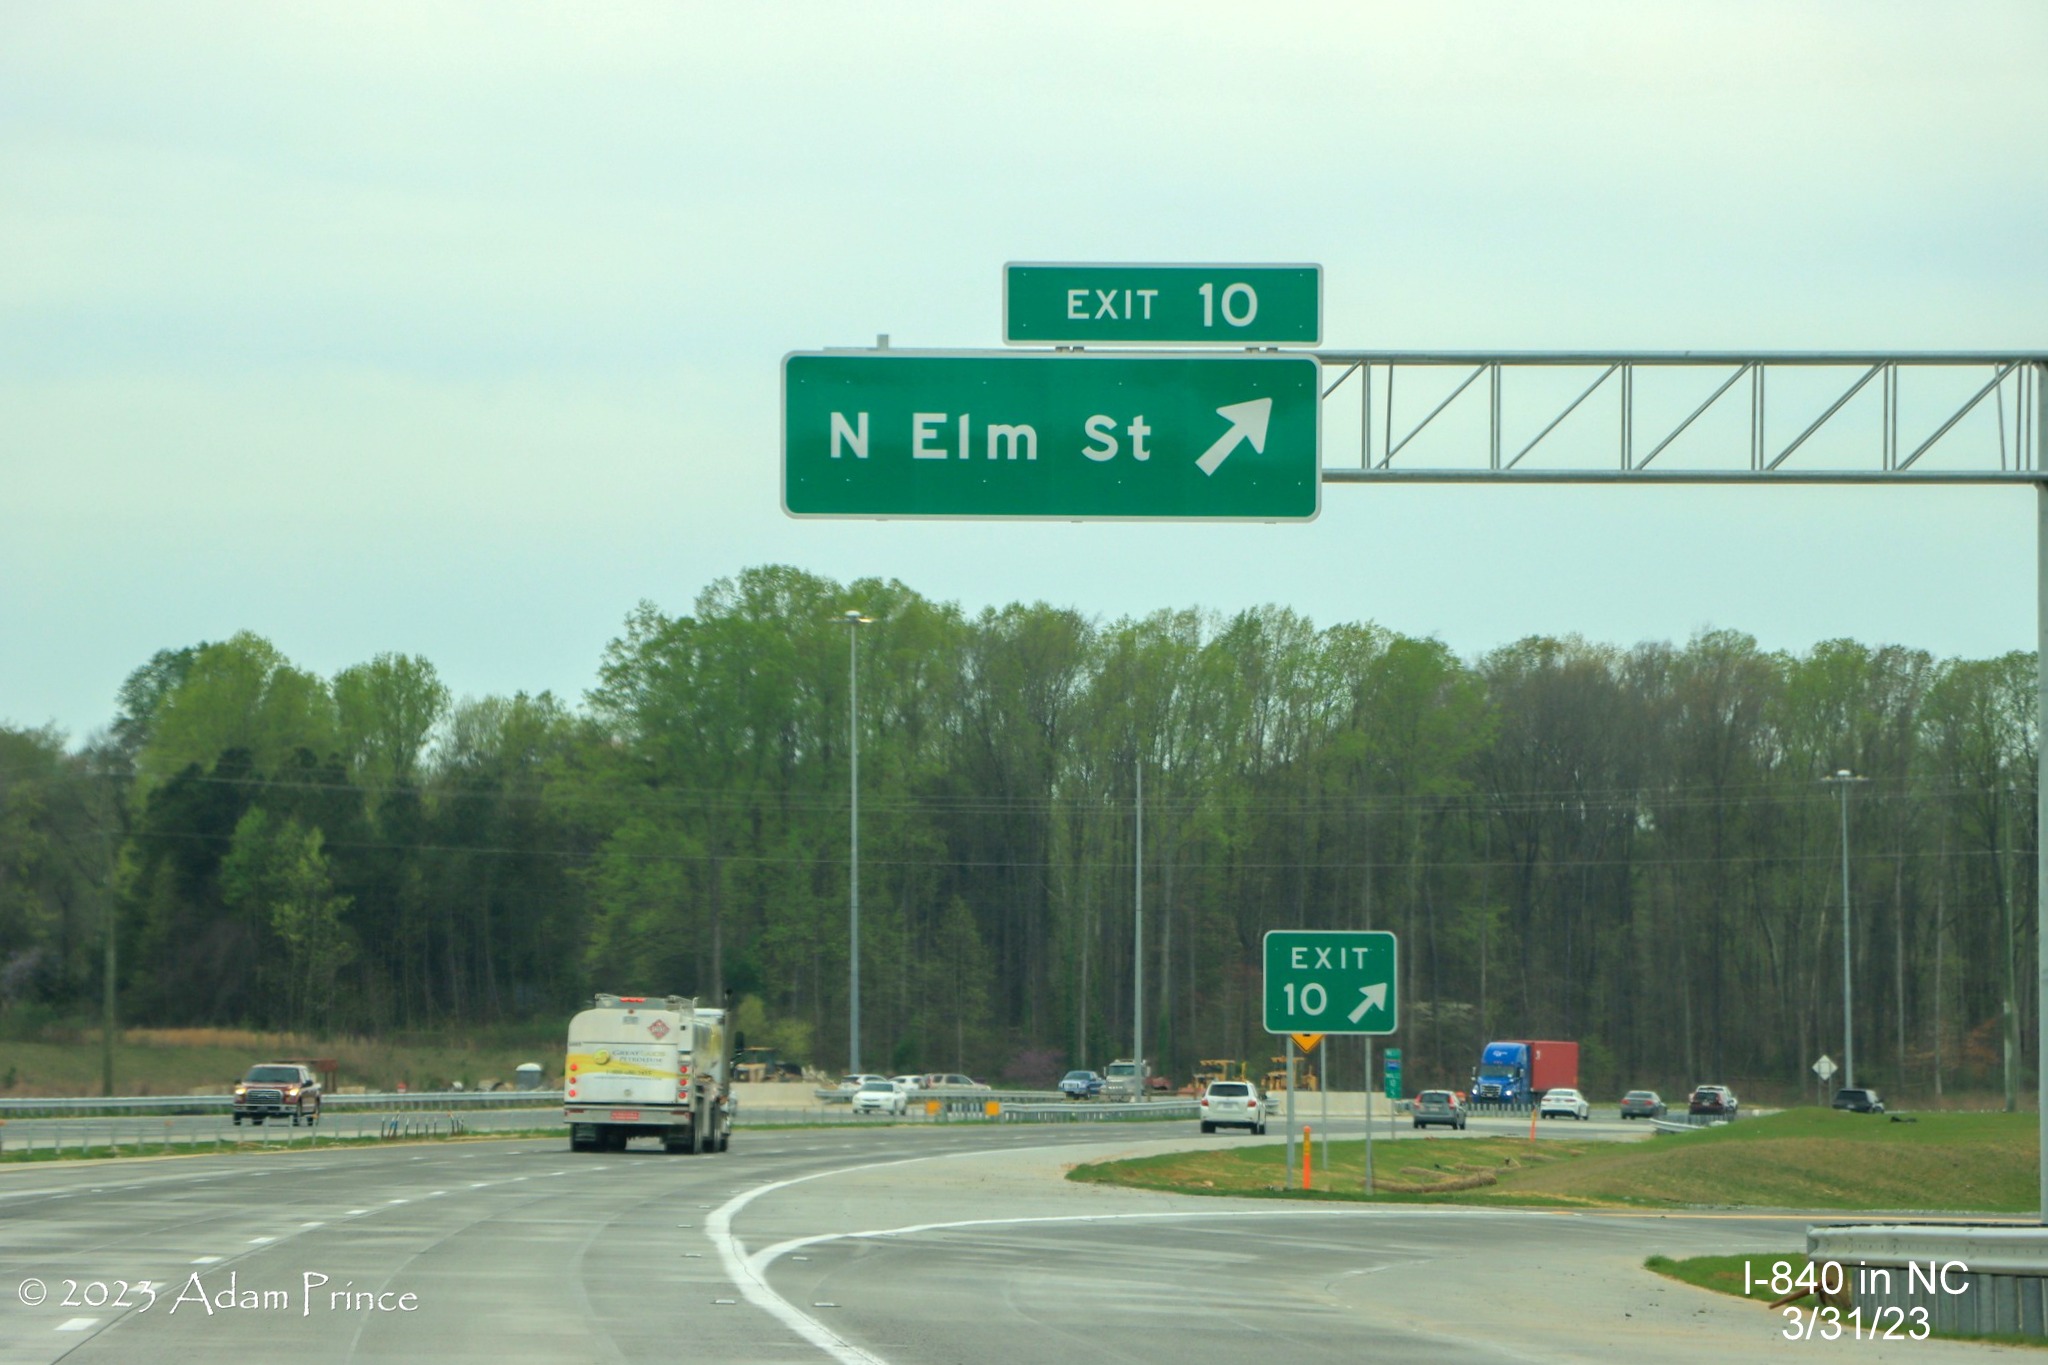 Image of overhead ramp sign for North Elm Street exit on I-840 West newest section of Greensboro 
             Loop, Adam Prince,  March 2023